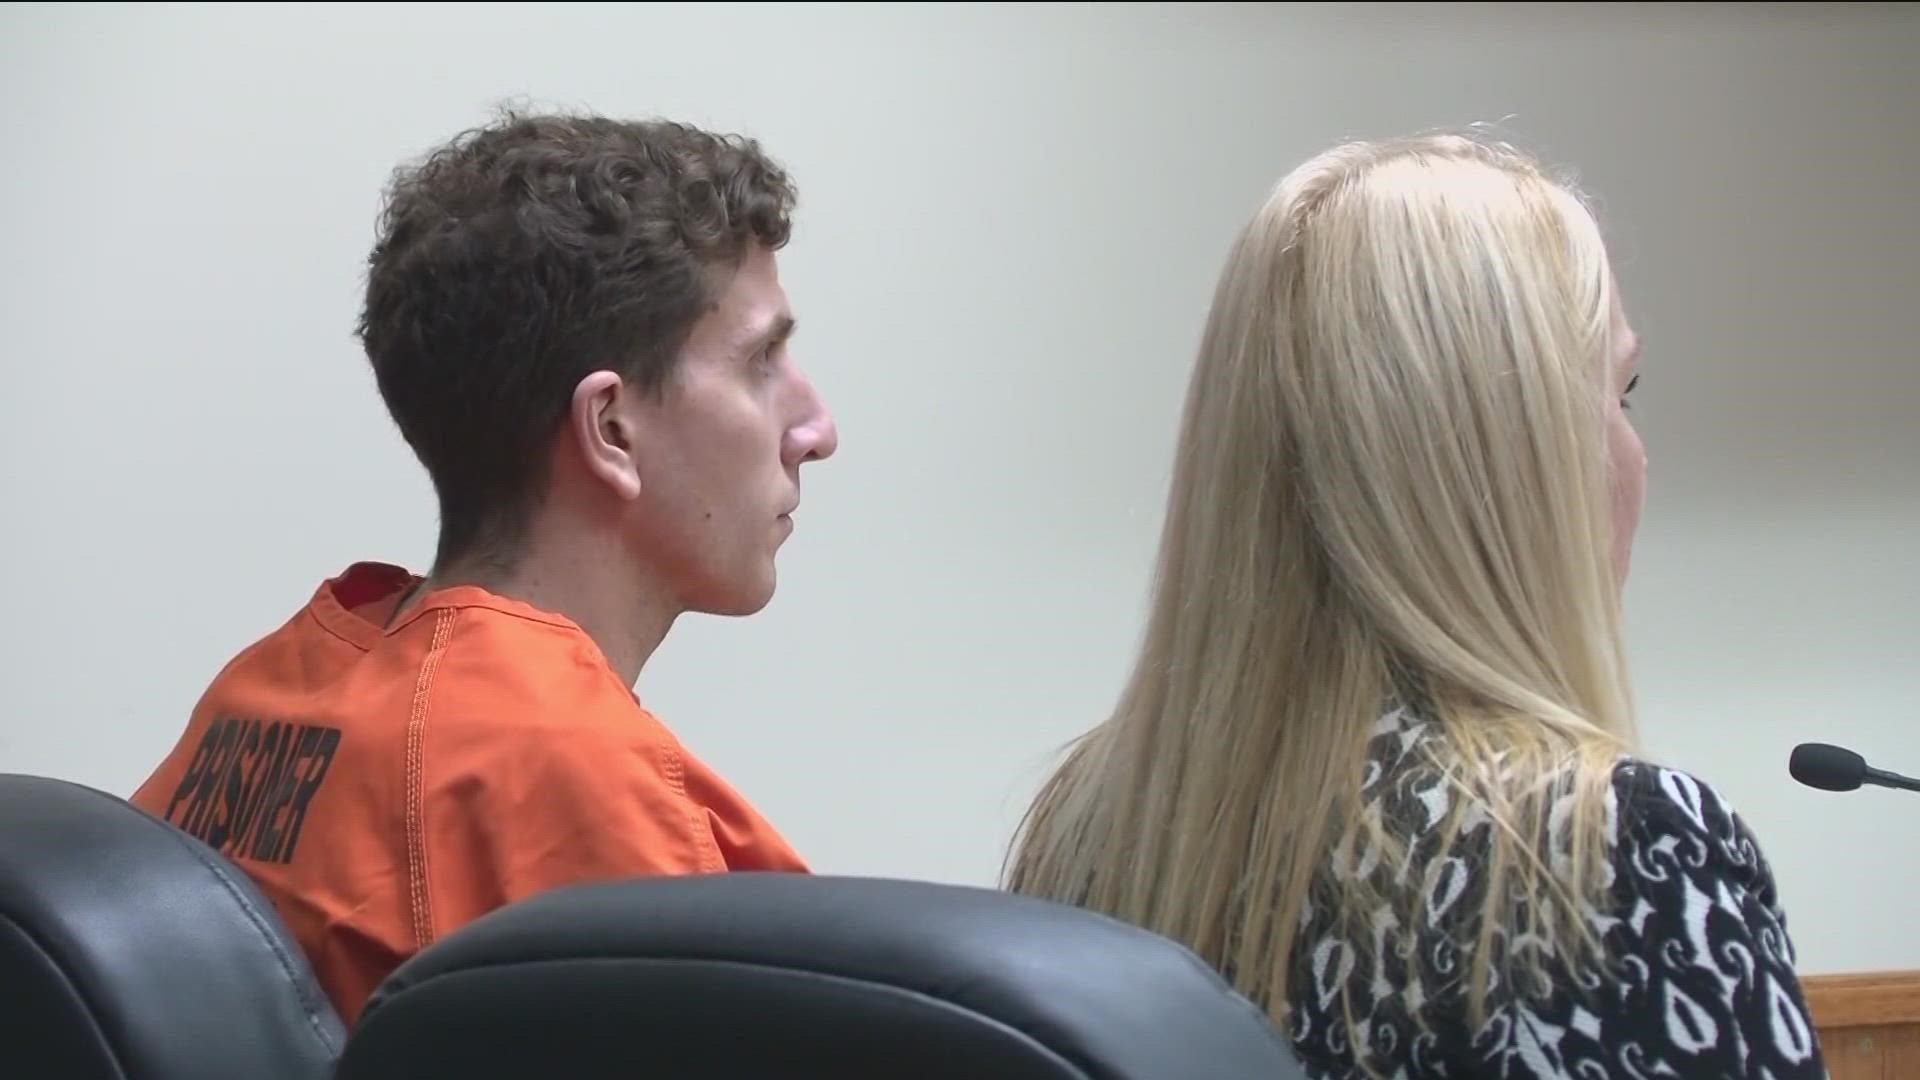 Bryan Kohberger, charged with the murders of four University of Idaho students, was ordered held without bail during his first court appearance in Moscow.